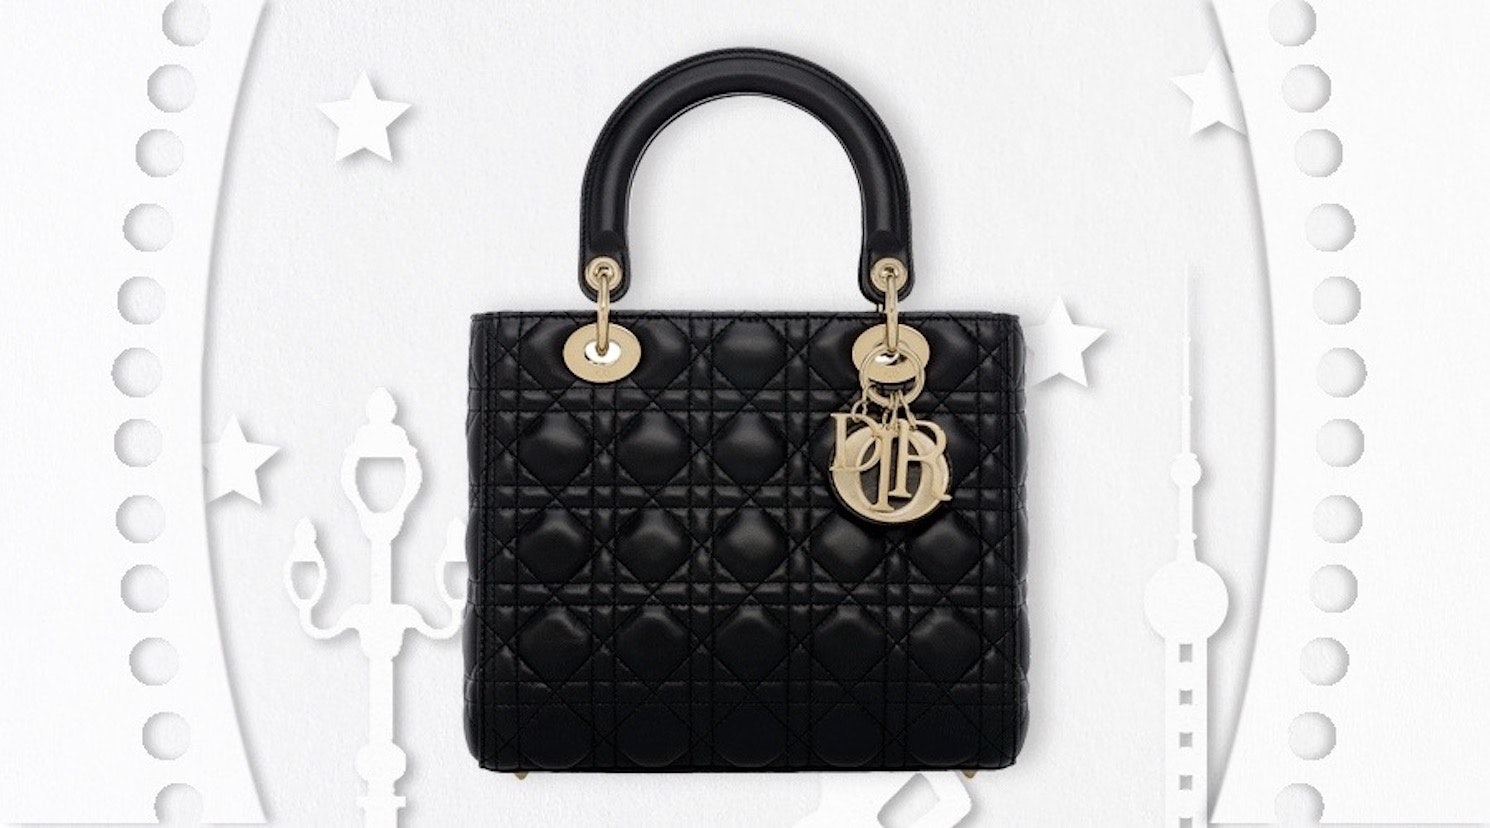 An image from Dior's limited-edition WeChat sale for China's Qixi Festival. The trend of luxury brands adopting WeChat sales was one of the top stories of the year.